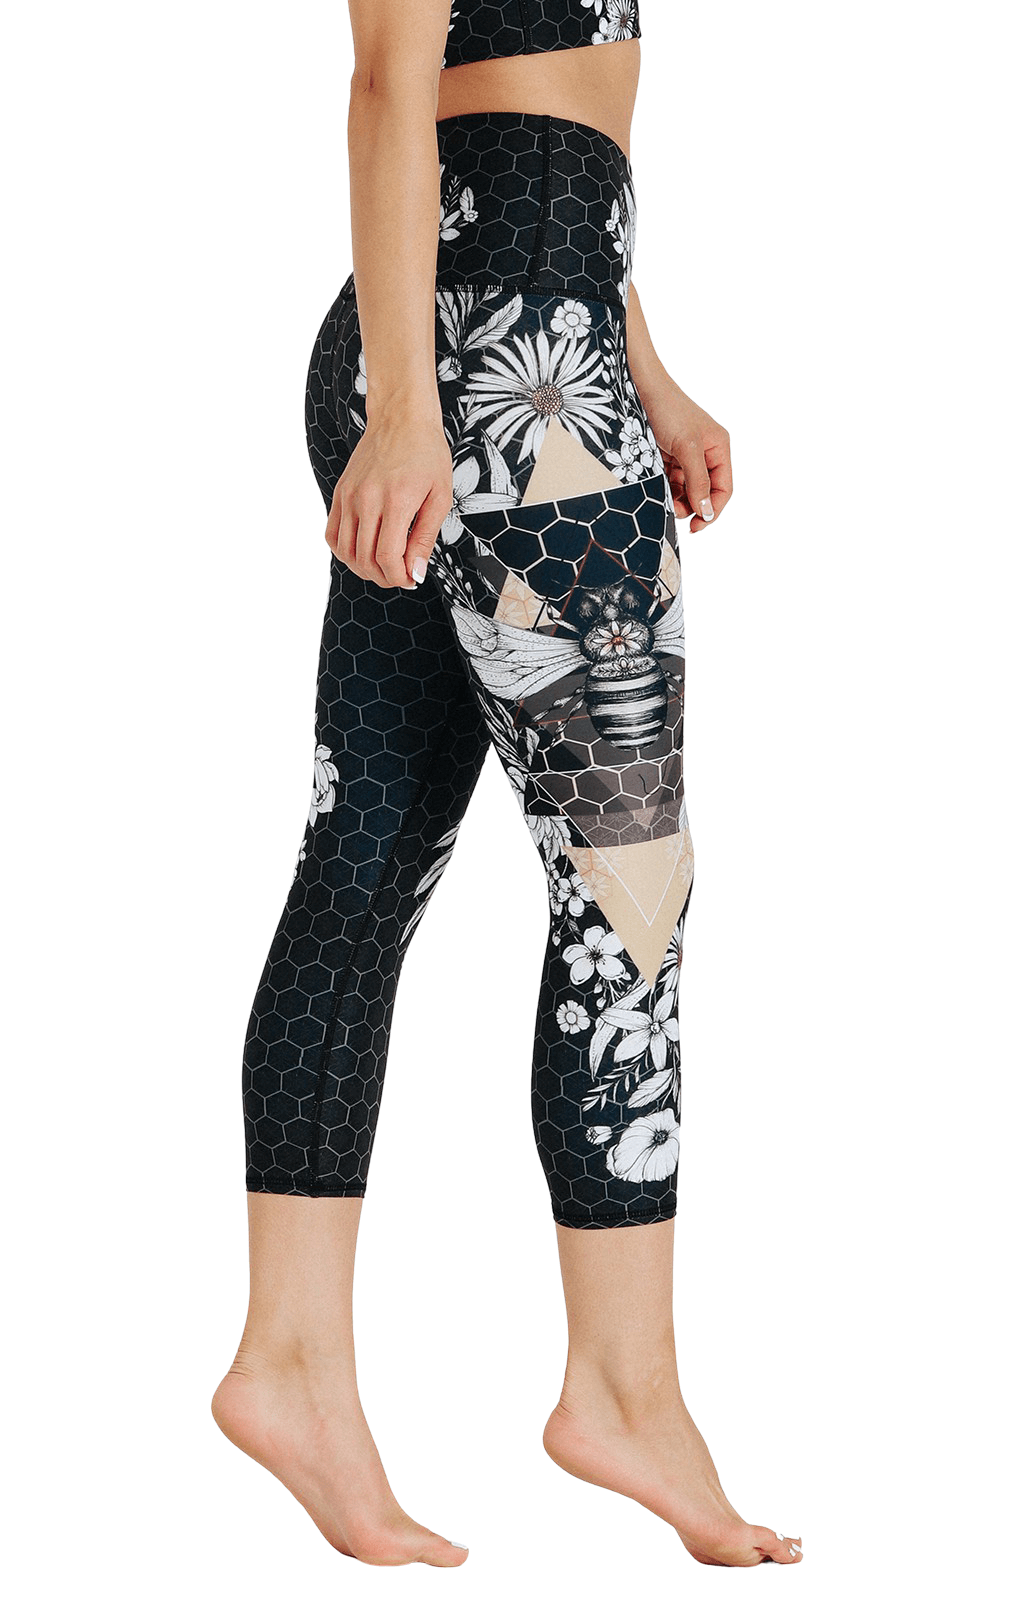 Beeloved Blackout Printed Yoga Crops Right